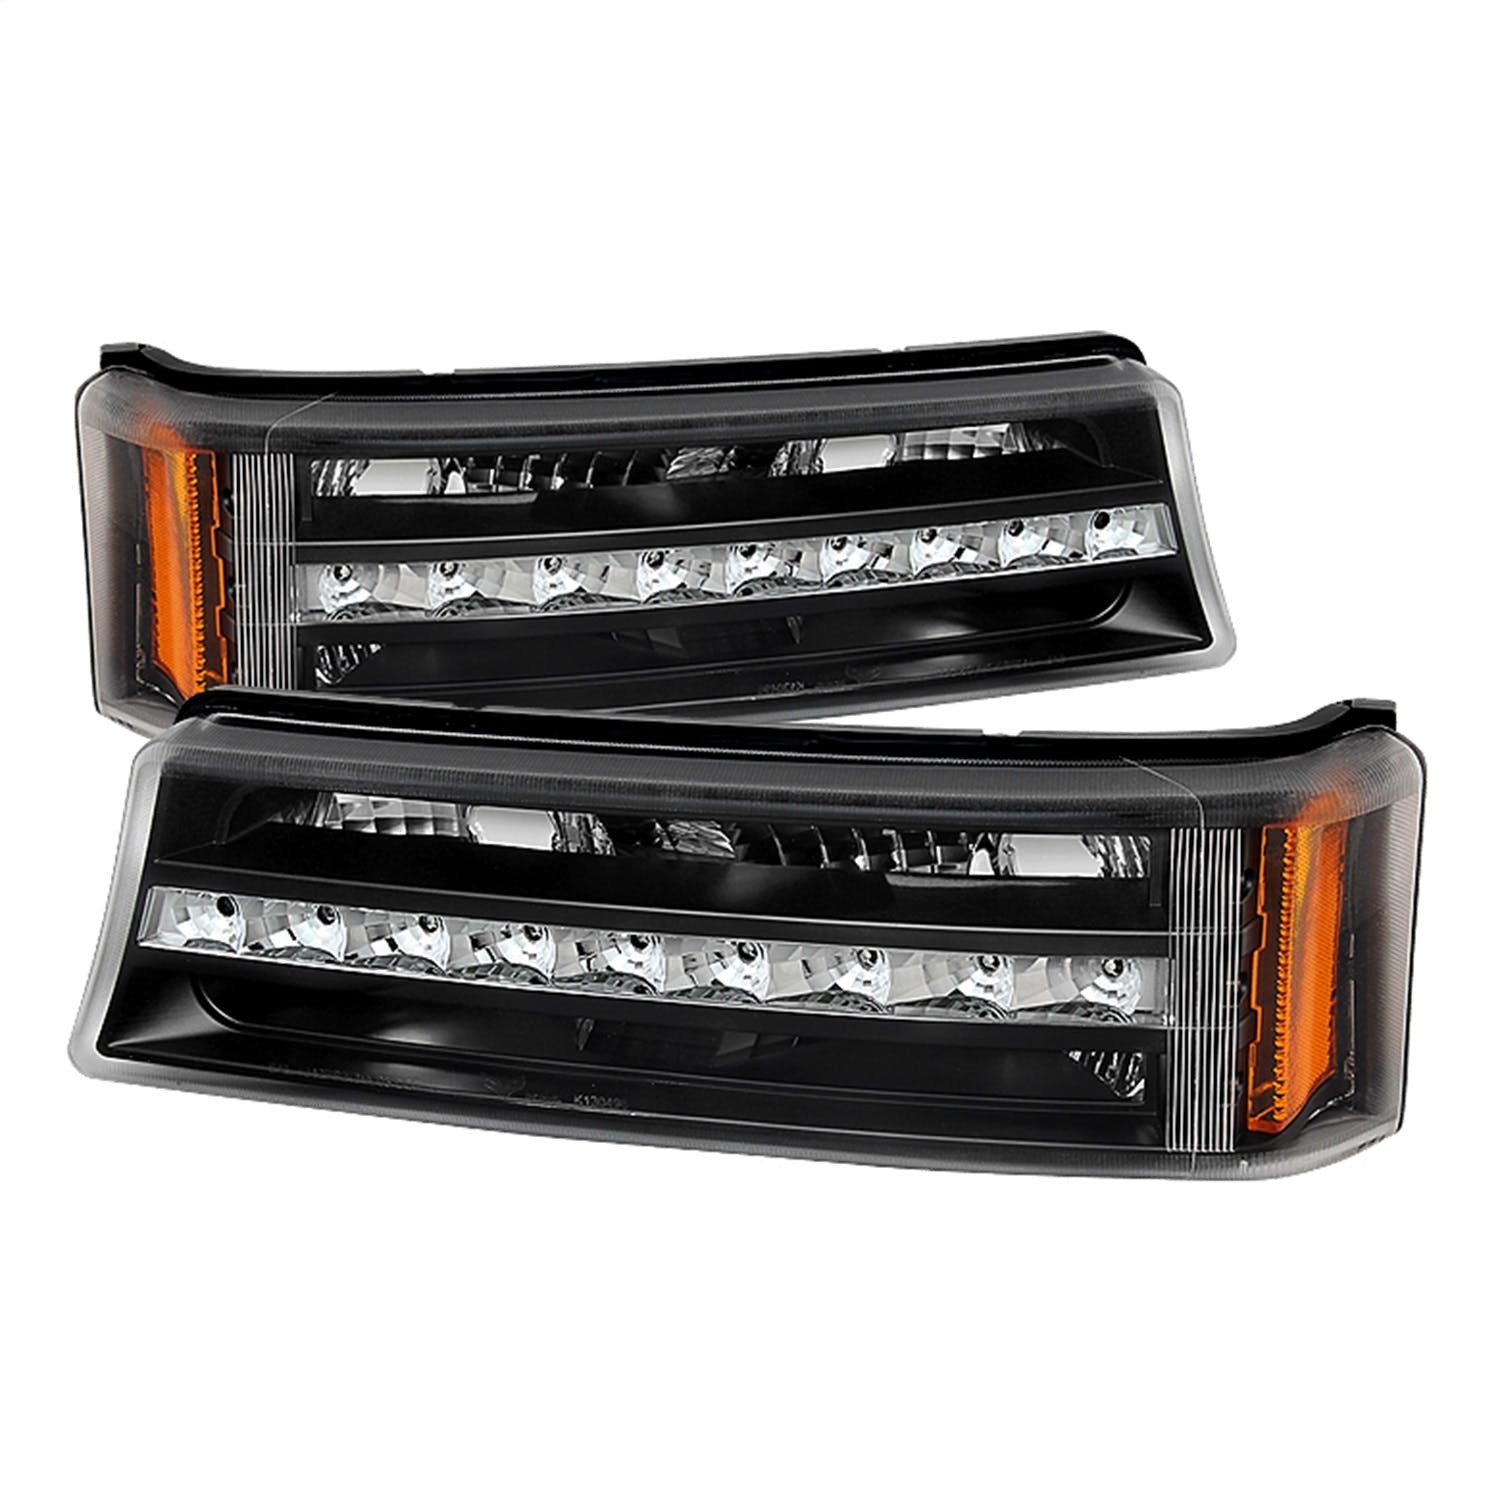 XTUNE POWER 9027482 Chevy Silverado 03 06 Avalanche 02 06 (Does Not fit with Body Cladding Models) LED Bumper Lights Black